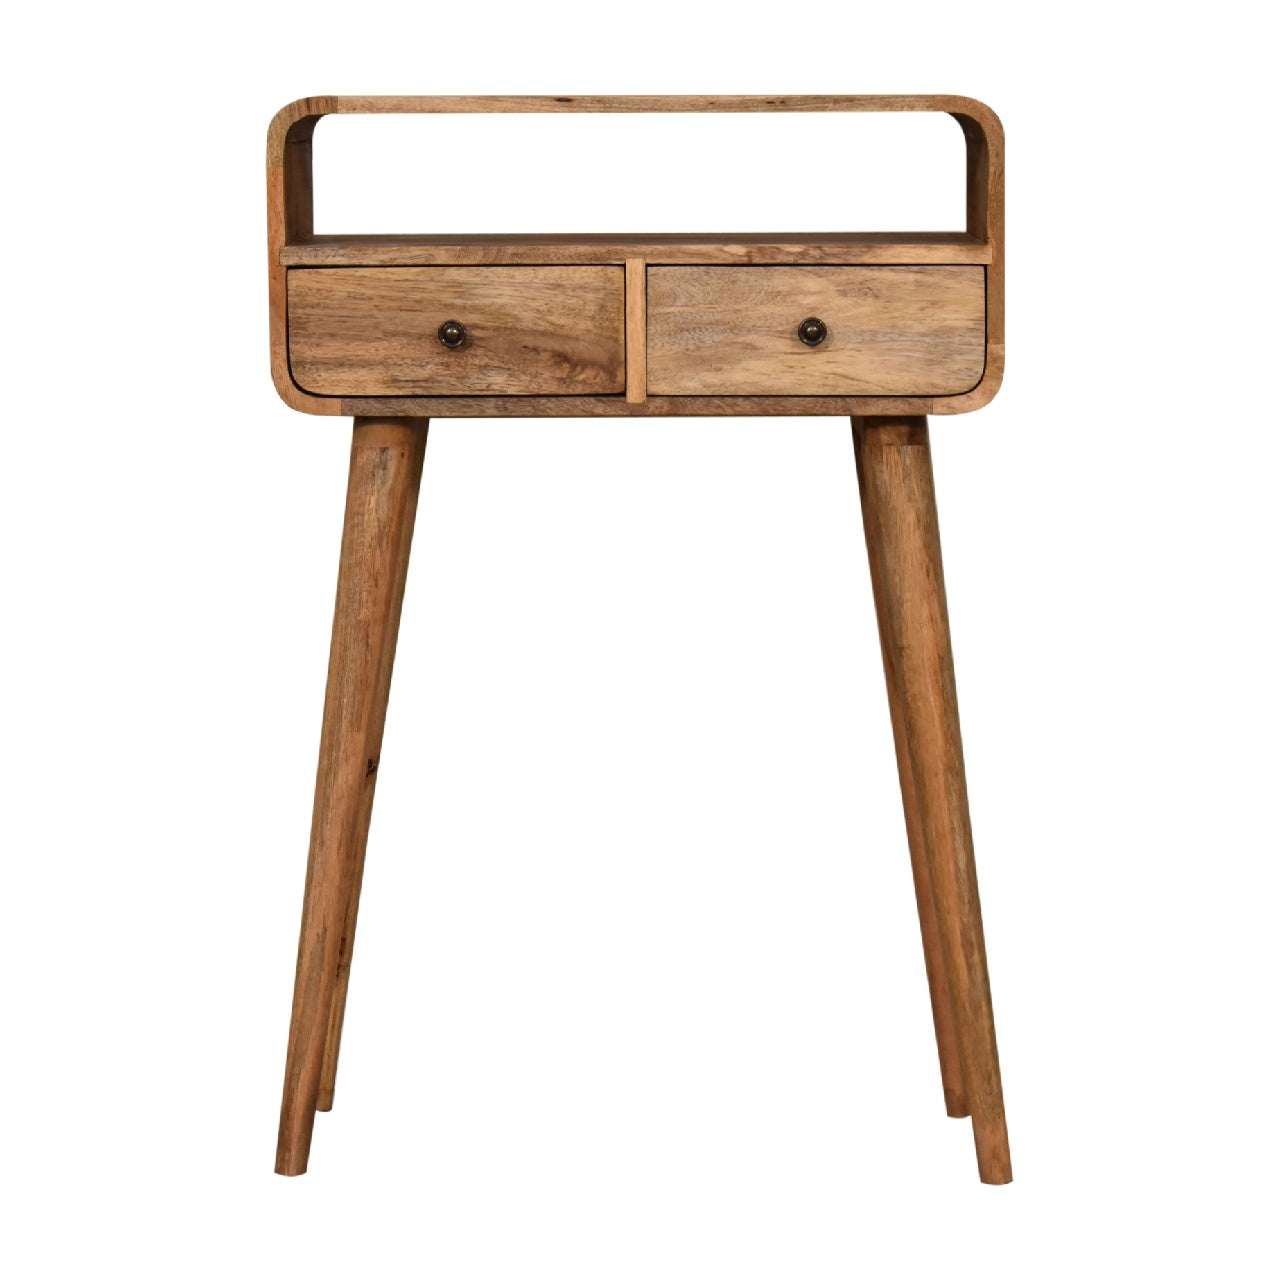 View Mini Curved Oakish Console Table information